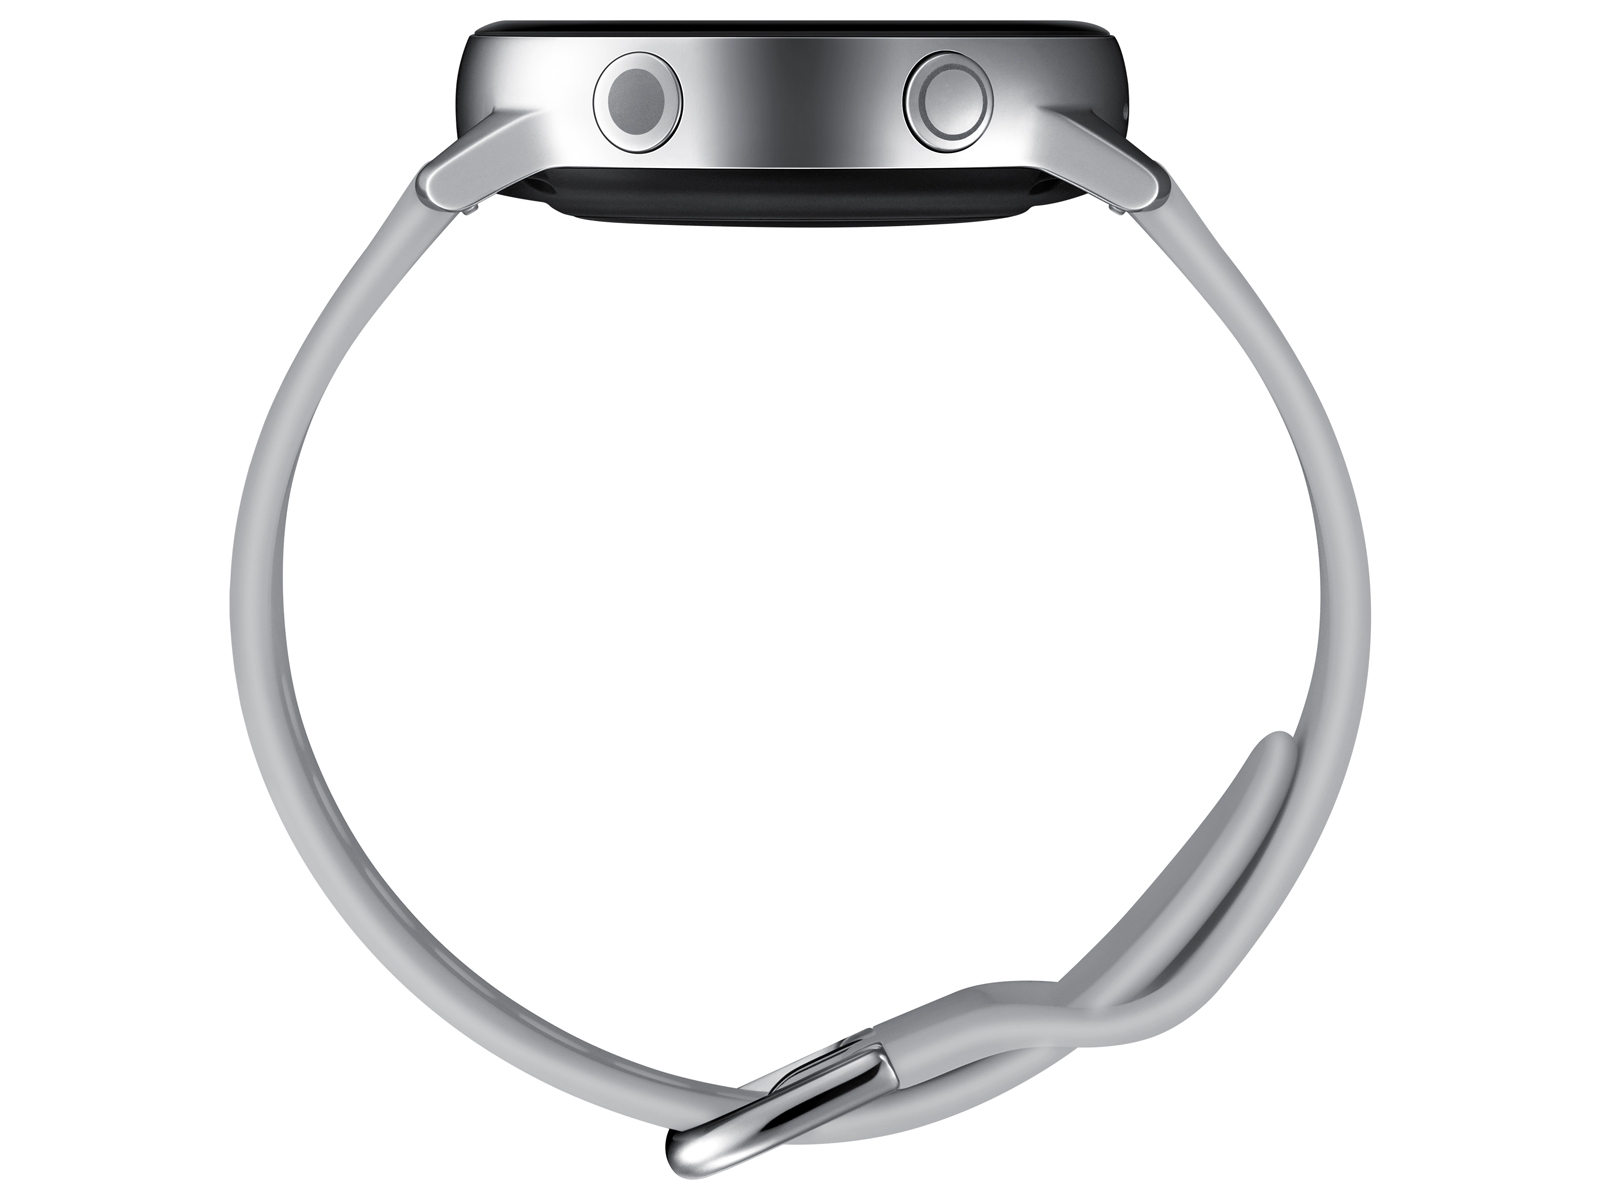 Thumbnail image of Galaxy Watch Active (40mm), Silver (Bluetooth)